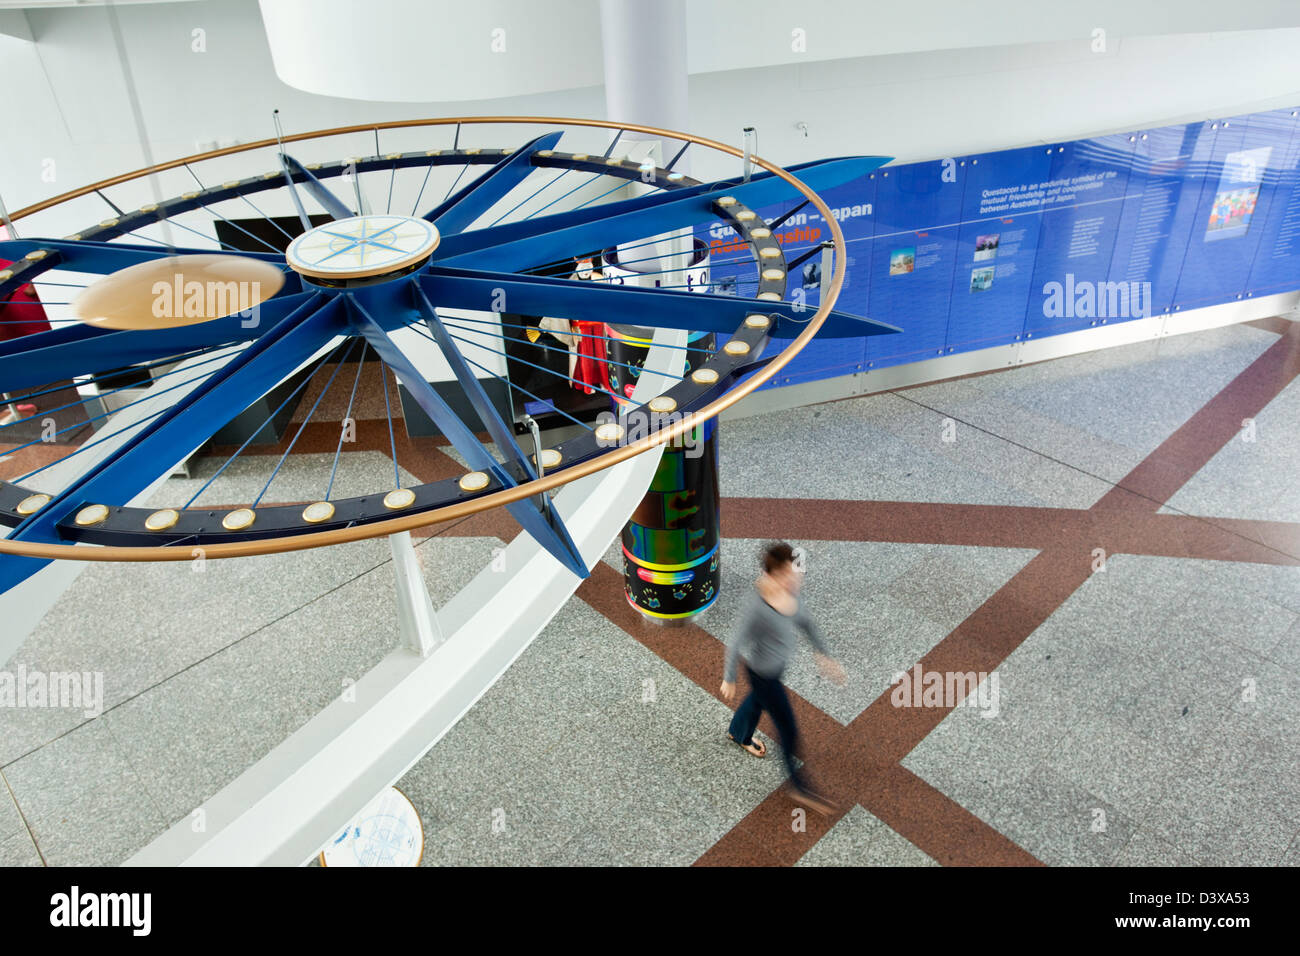 Foyer des Questacon - das National Science and Technology Centre. Canberra, Australian Capital Territory (ACT), Australien Stockfoto